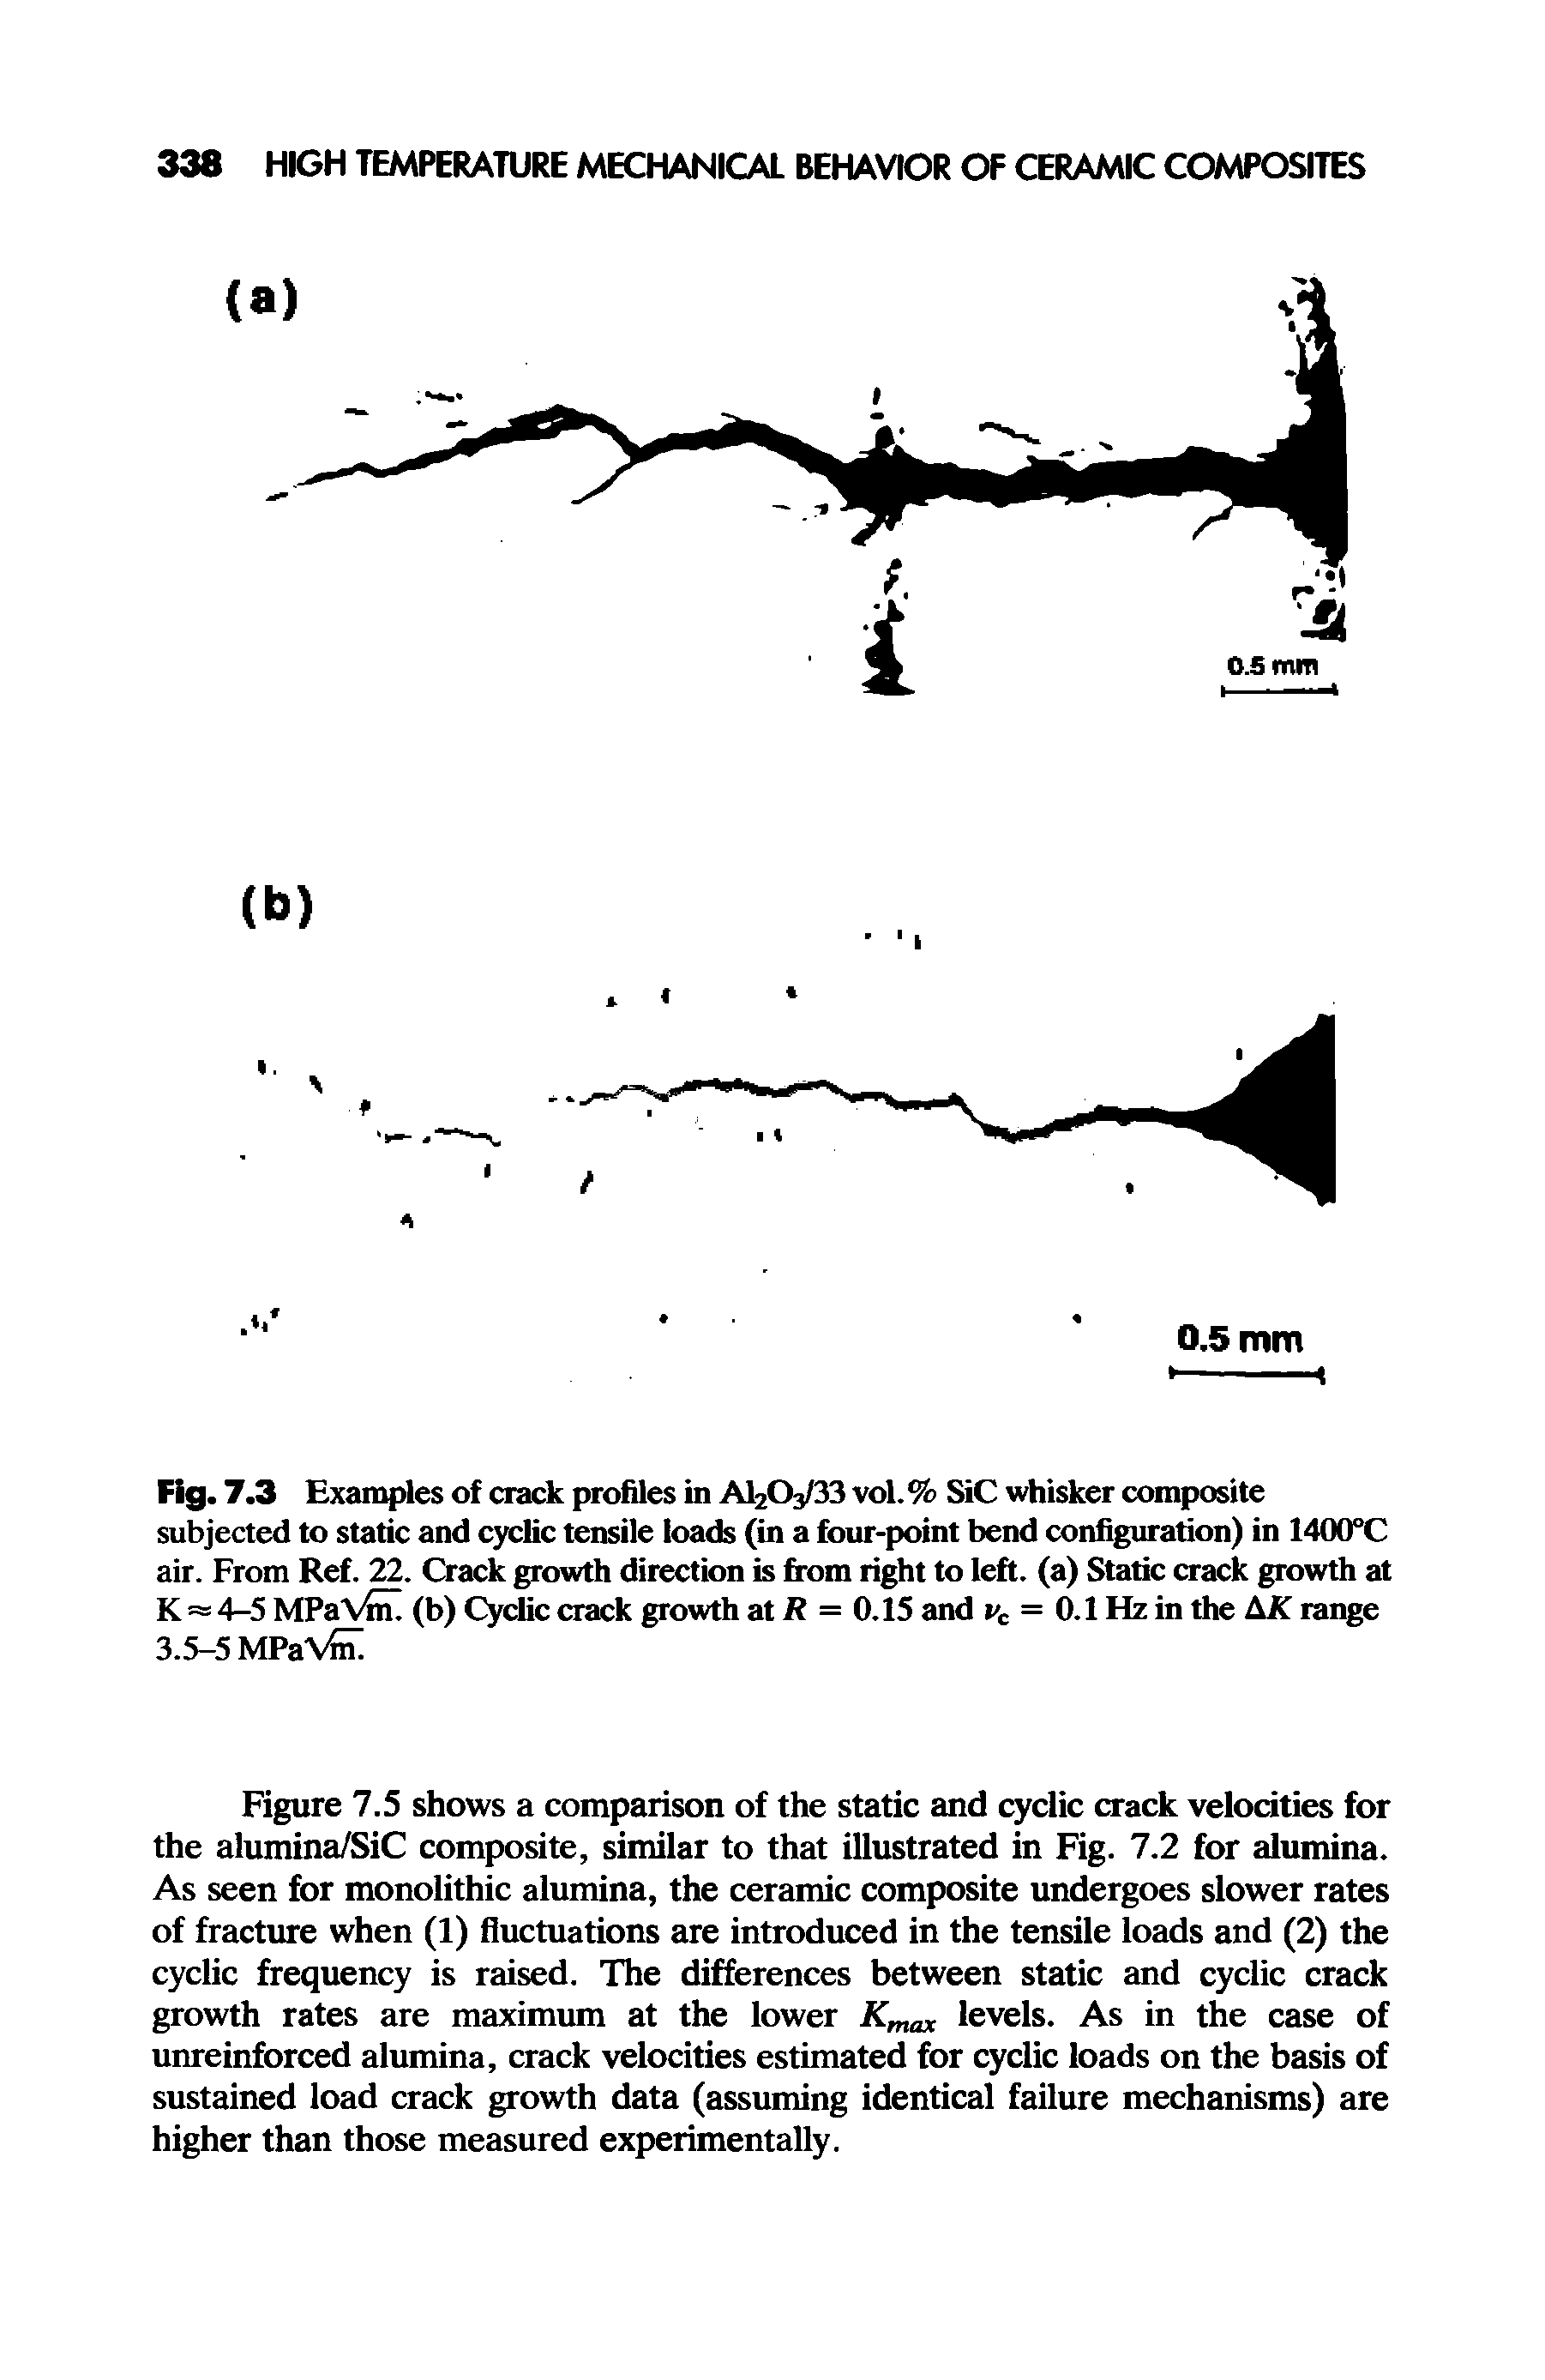 Fig. 7.3 Examples of crack profiles in AI2O3/33 vol.% SiC whisker composite subjected to static and cyclic tensile loads (in a four-point bend configuration) in 1400°C air. From Ref. 22. Crack growth direction is from right to left, (a) Static crack growth at K 4-5 MPaVnT (b) Cyclic crack growth at R = 0.15 and vc = 0.1 Hz in the AK range 3.5-5 MPaVfiT...